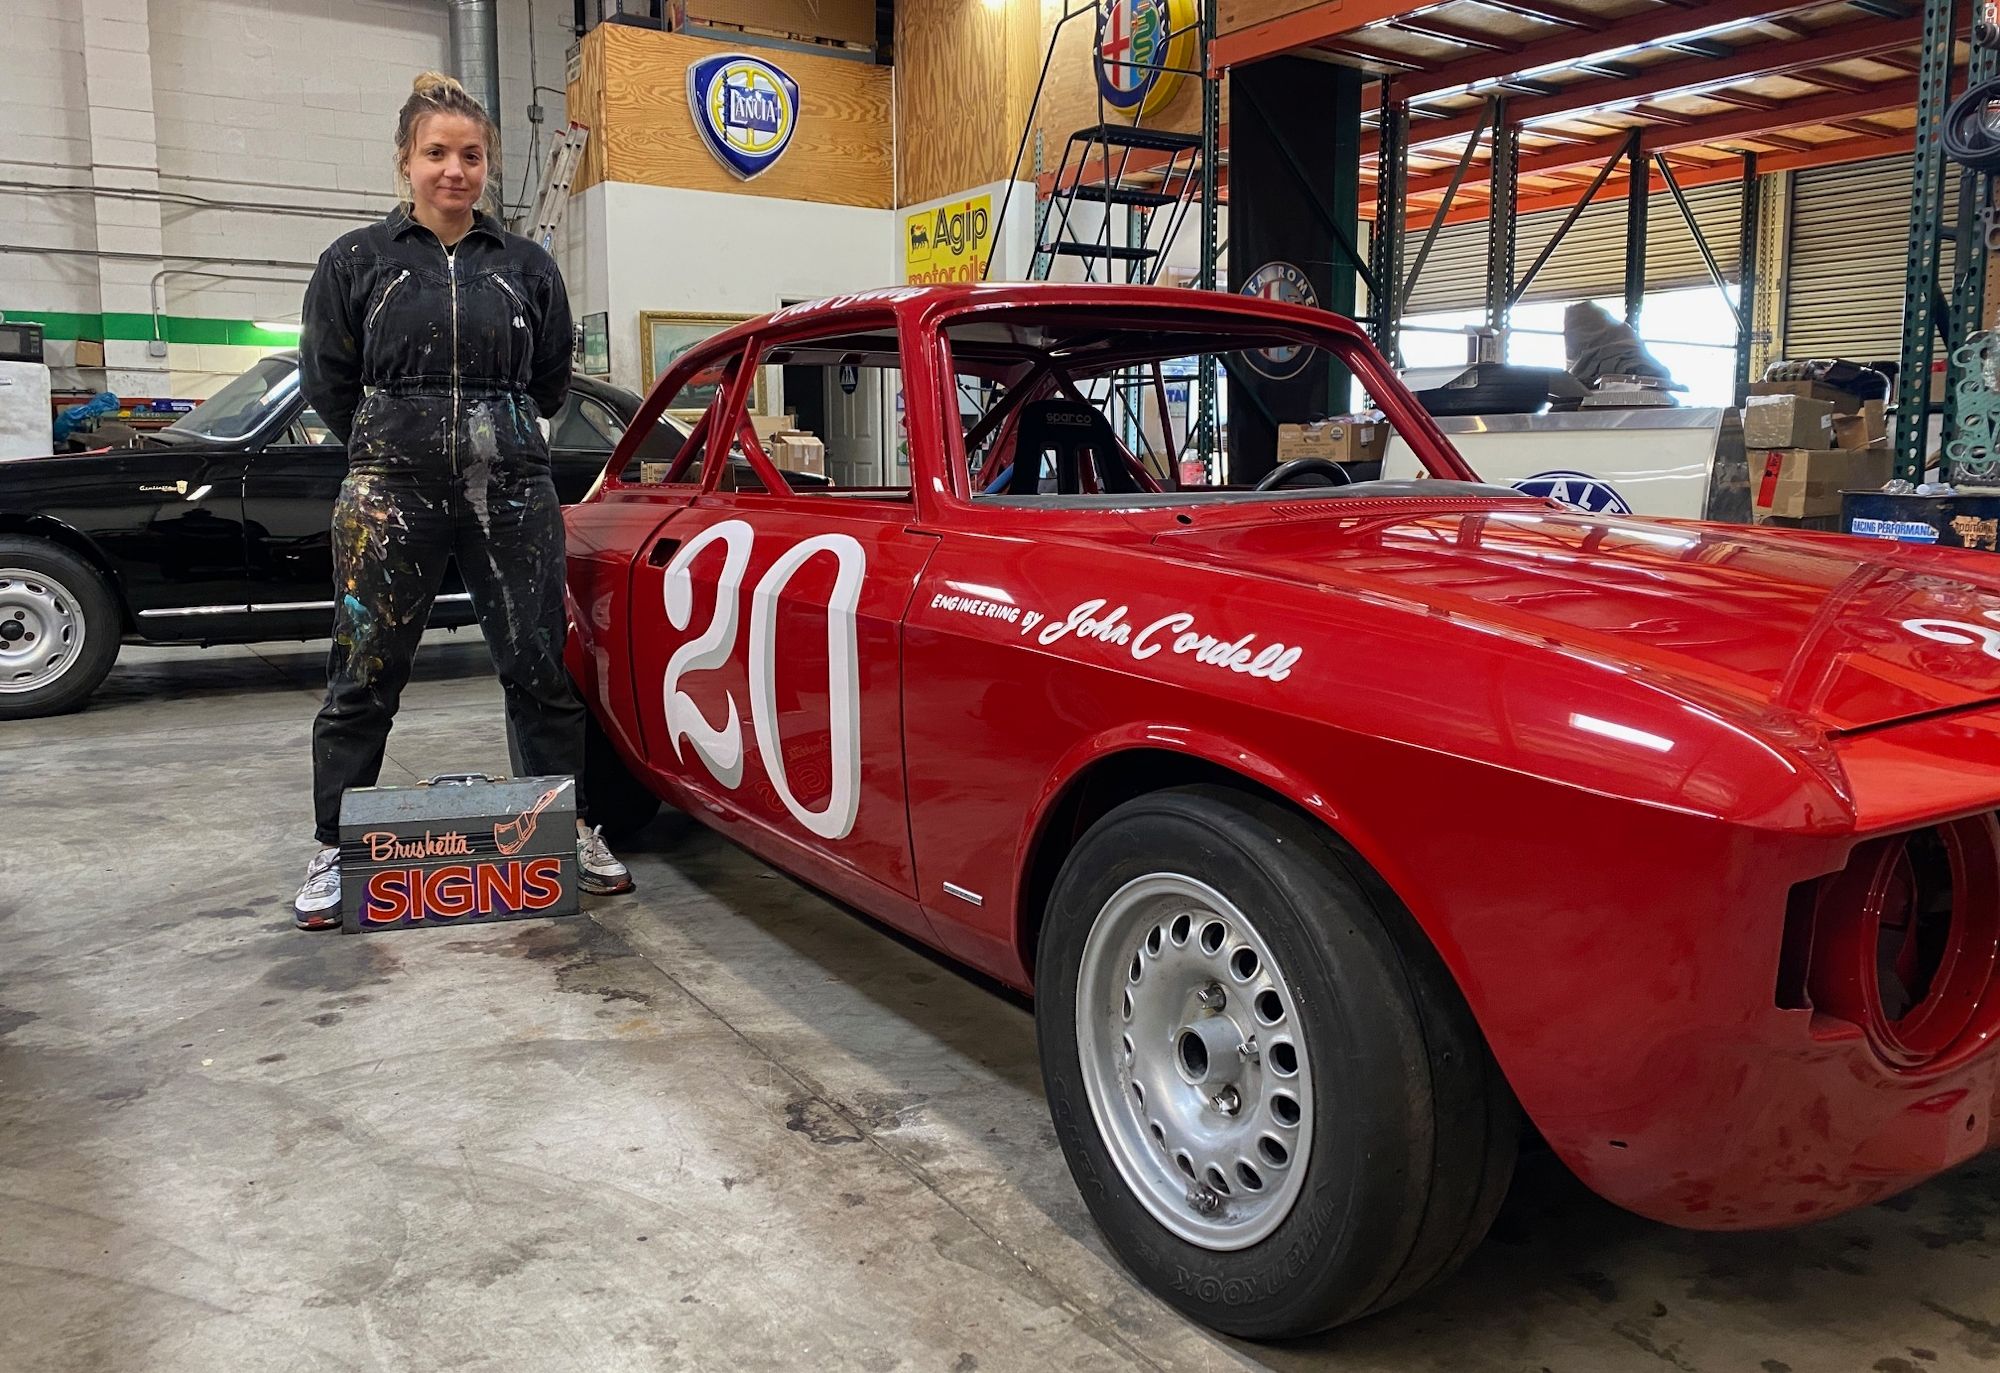 Woman in overalls and sign painting kit standing next to a bright red racing car painted with the number 20 on its side.